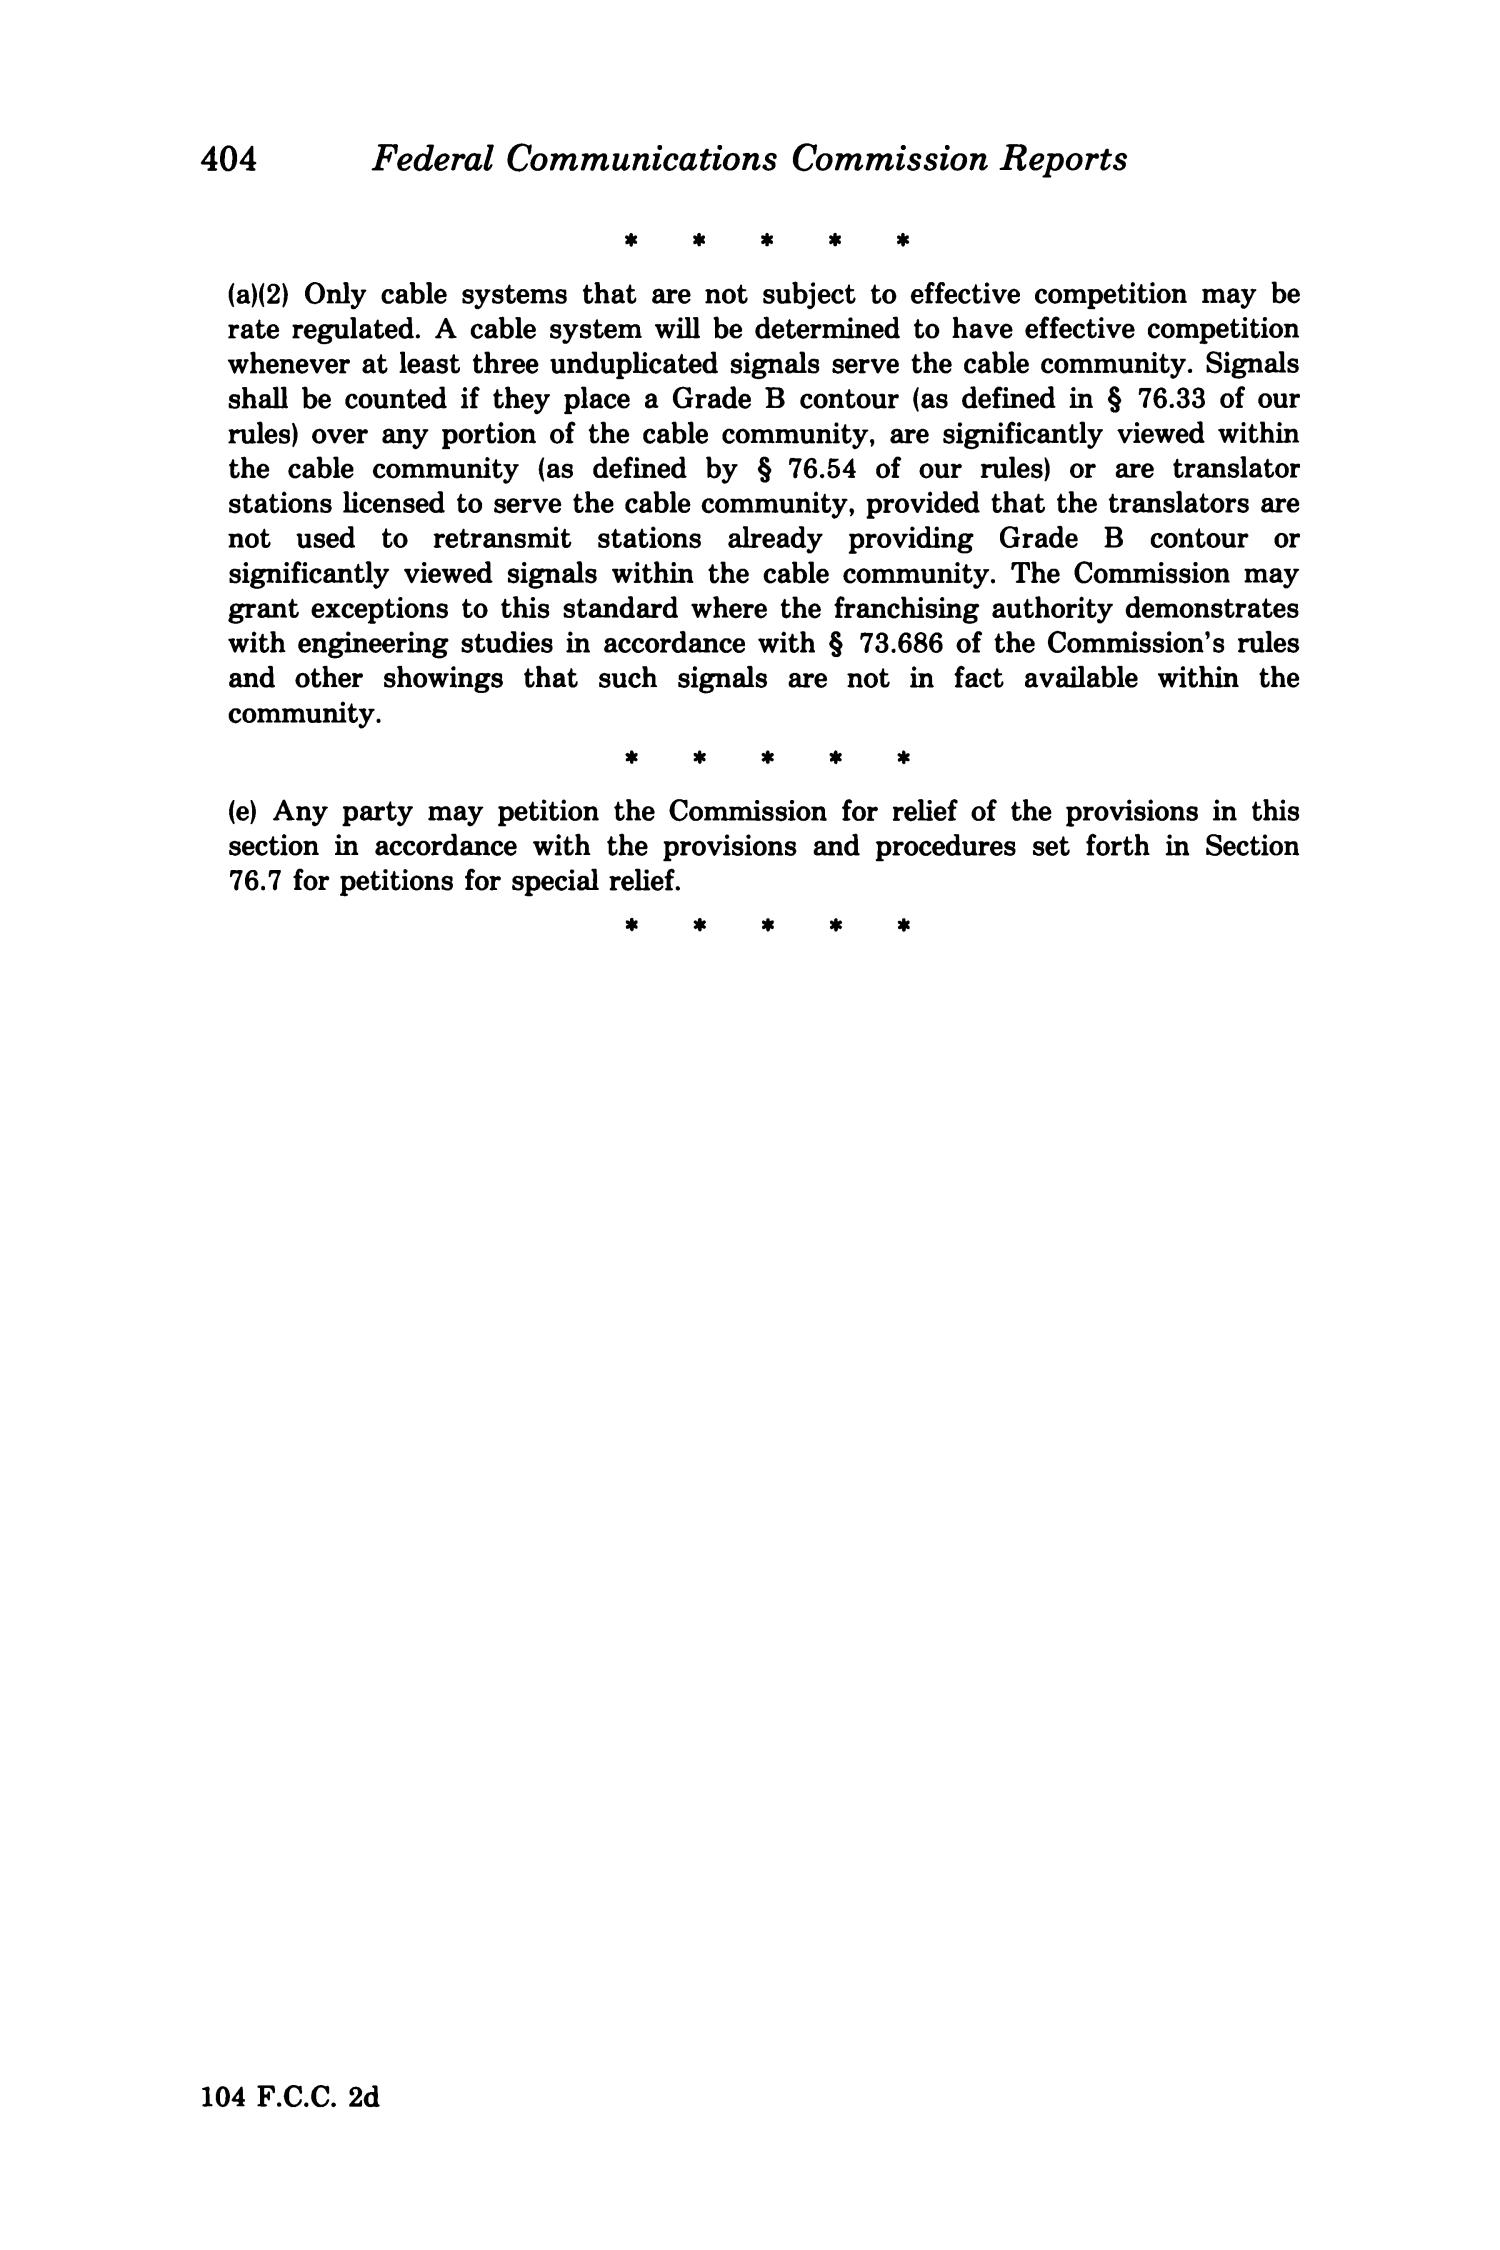 FCC Reports, Second Series, Volume 104, Number 2, Pages 375 to 719, August 1986
                                                
                                                    404
                                                